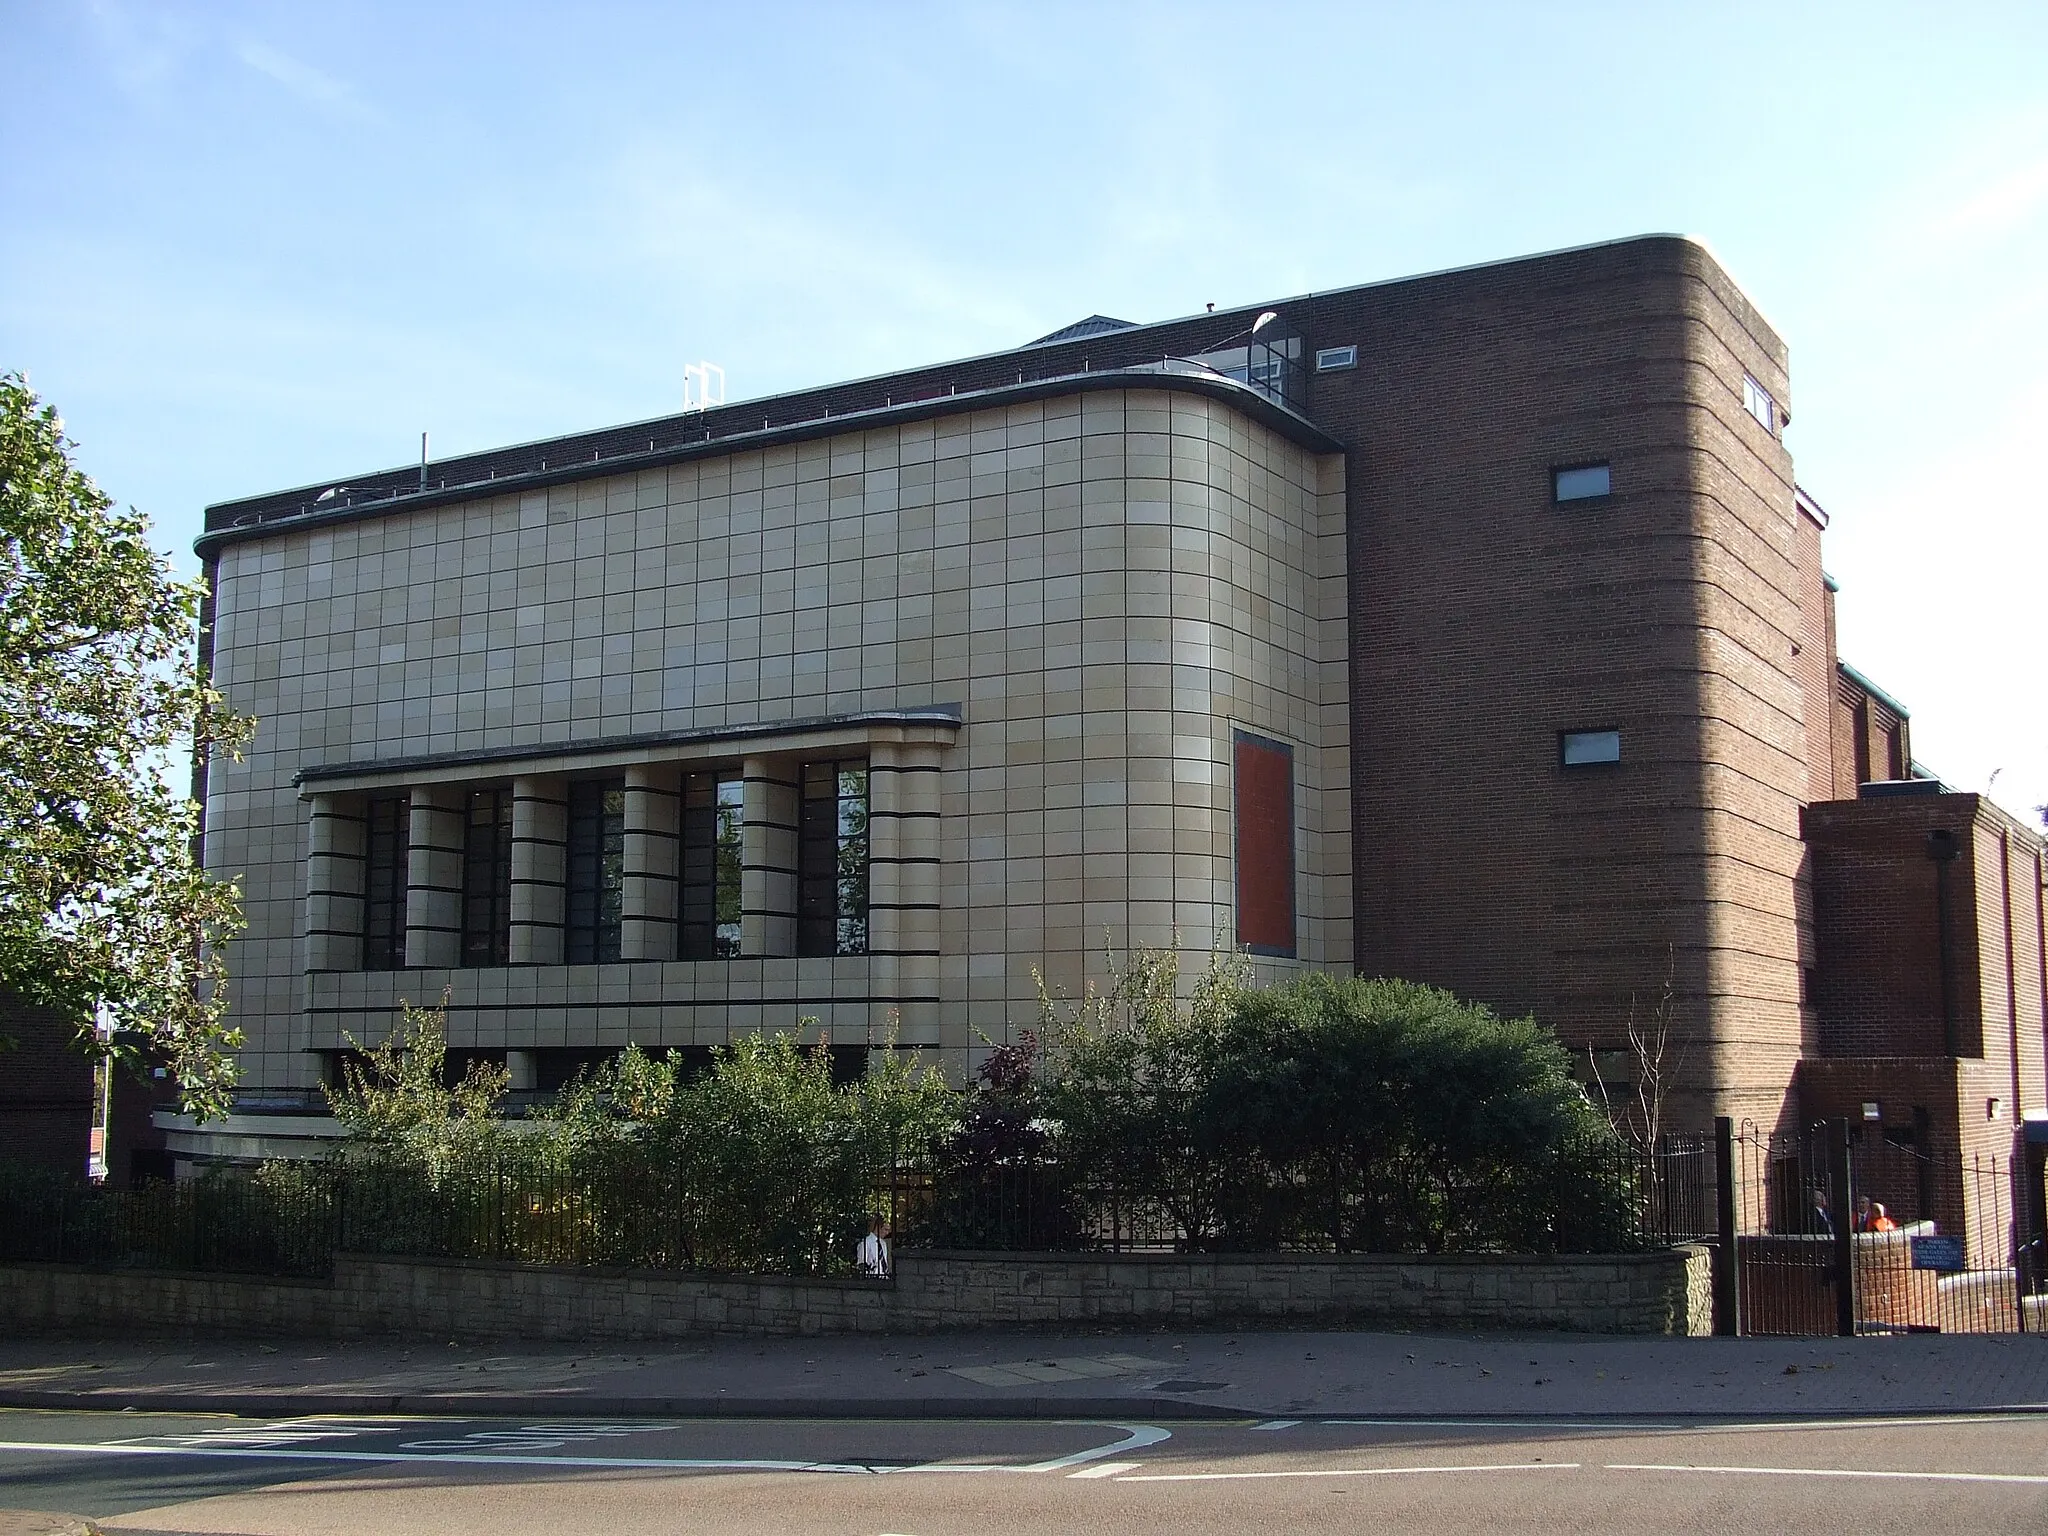 Photo showing: The former Odeon Cinema in Dudley that opened in 1937. It is now a church for the Jehovah's Witnesses, and in 2000 was made a Grade II Listed Building.